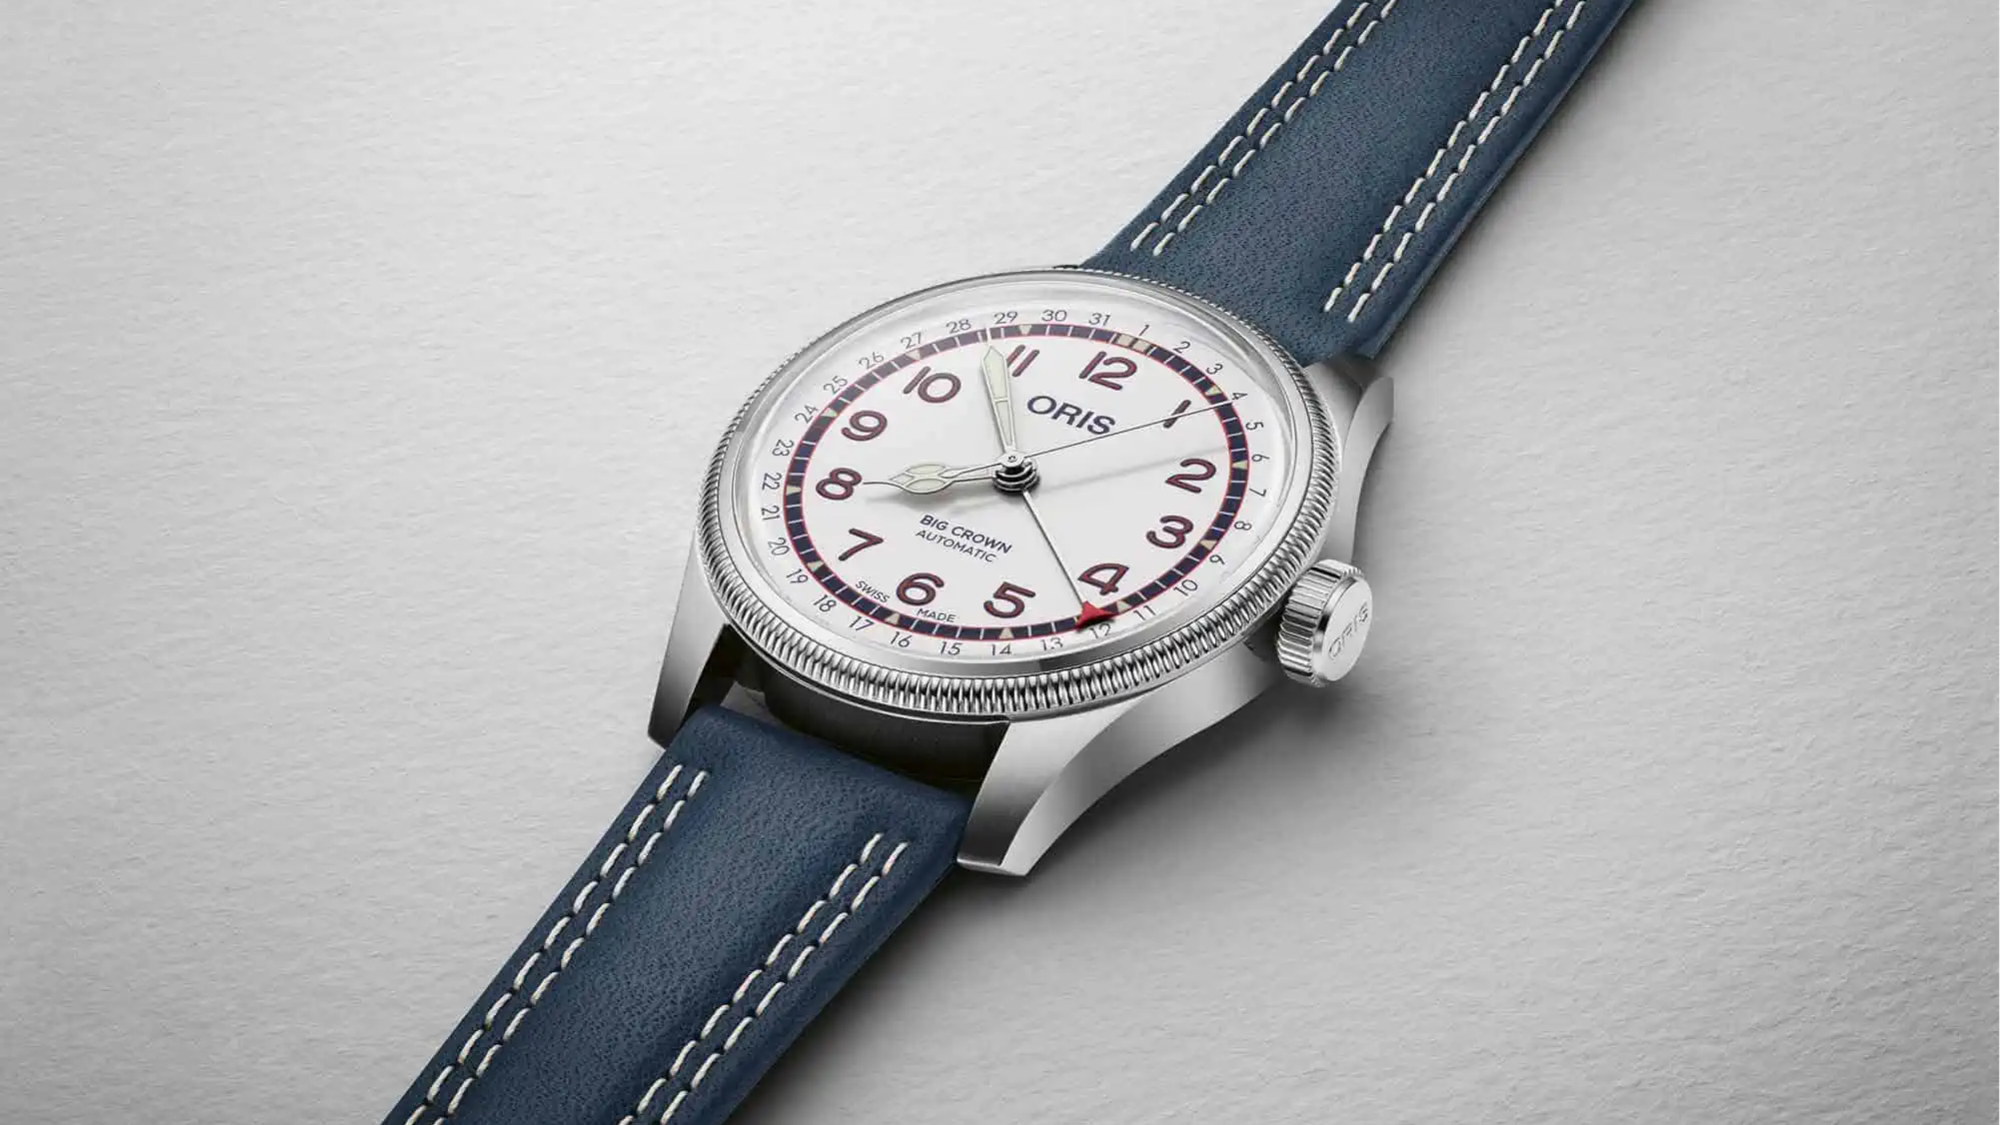 Lorier Updates their Hydra and Hyperion Lines with New Watches